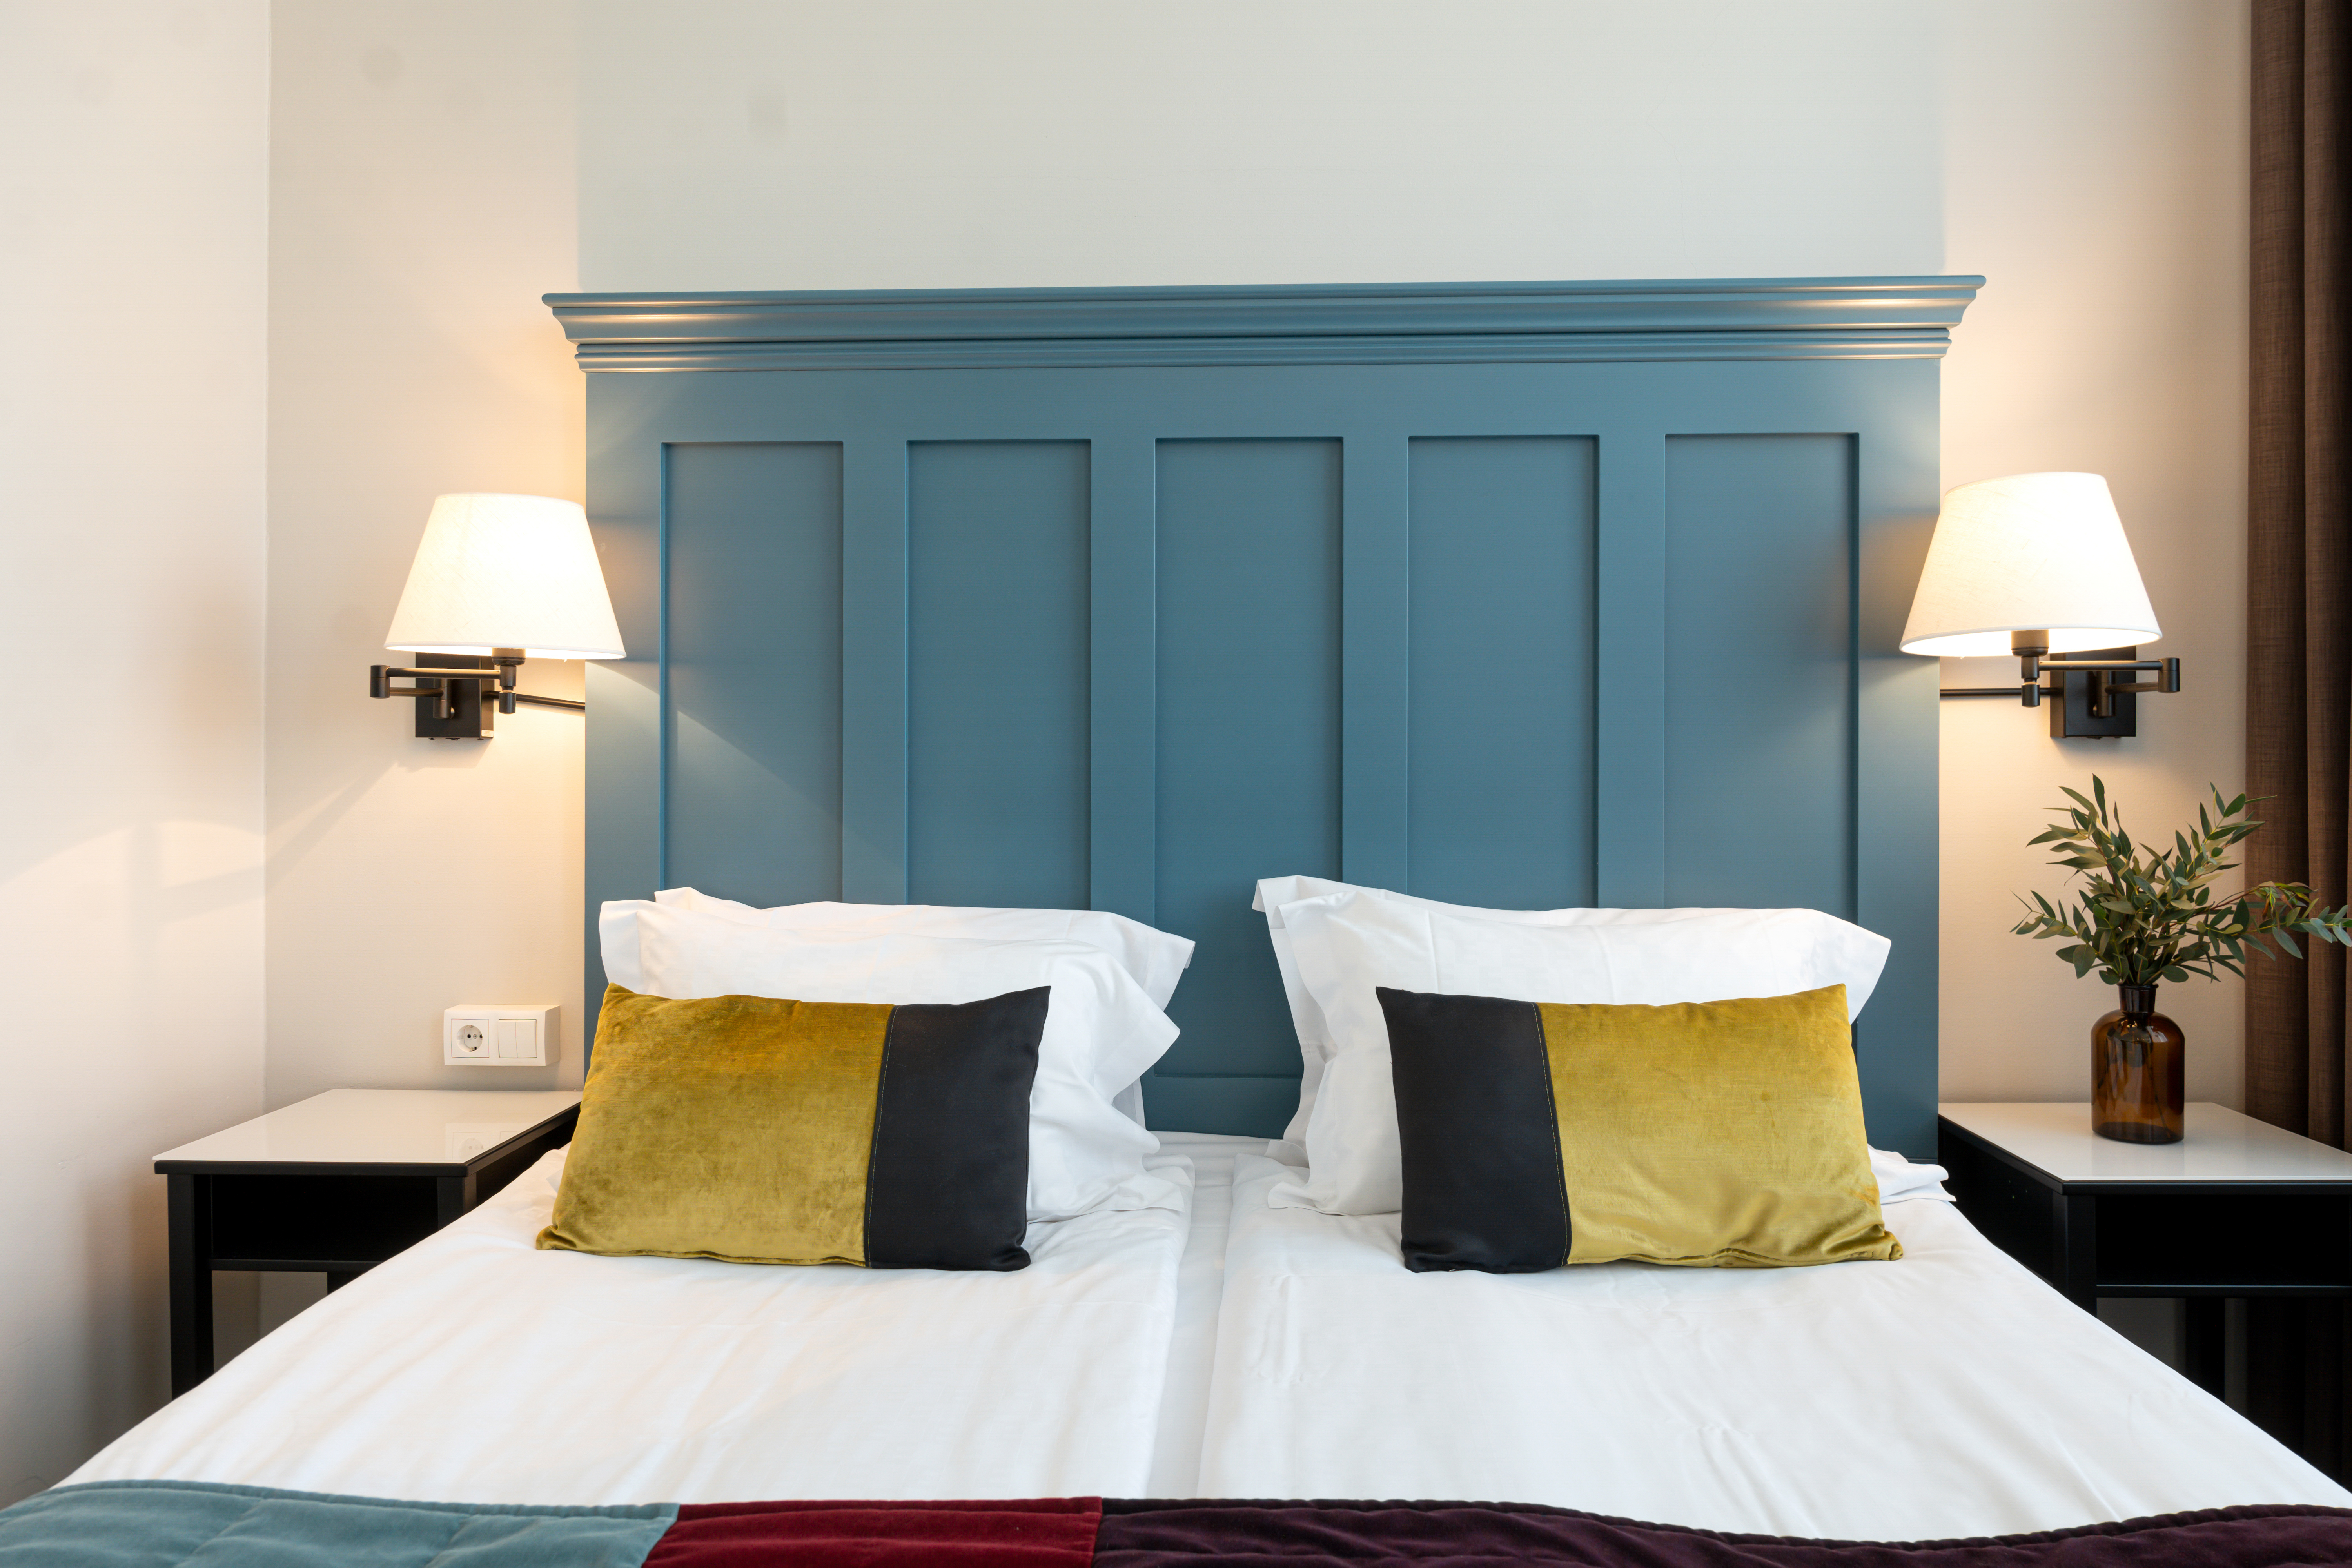 Bright hotel room with bed, large blue headboard and bedside lamps